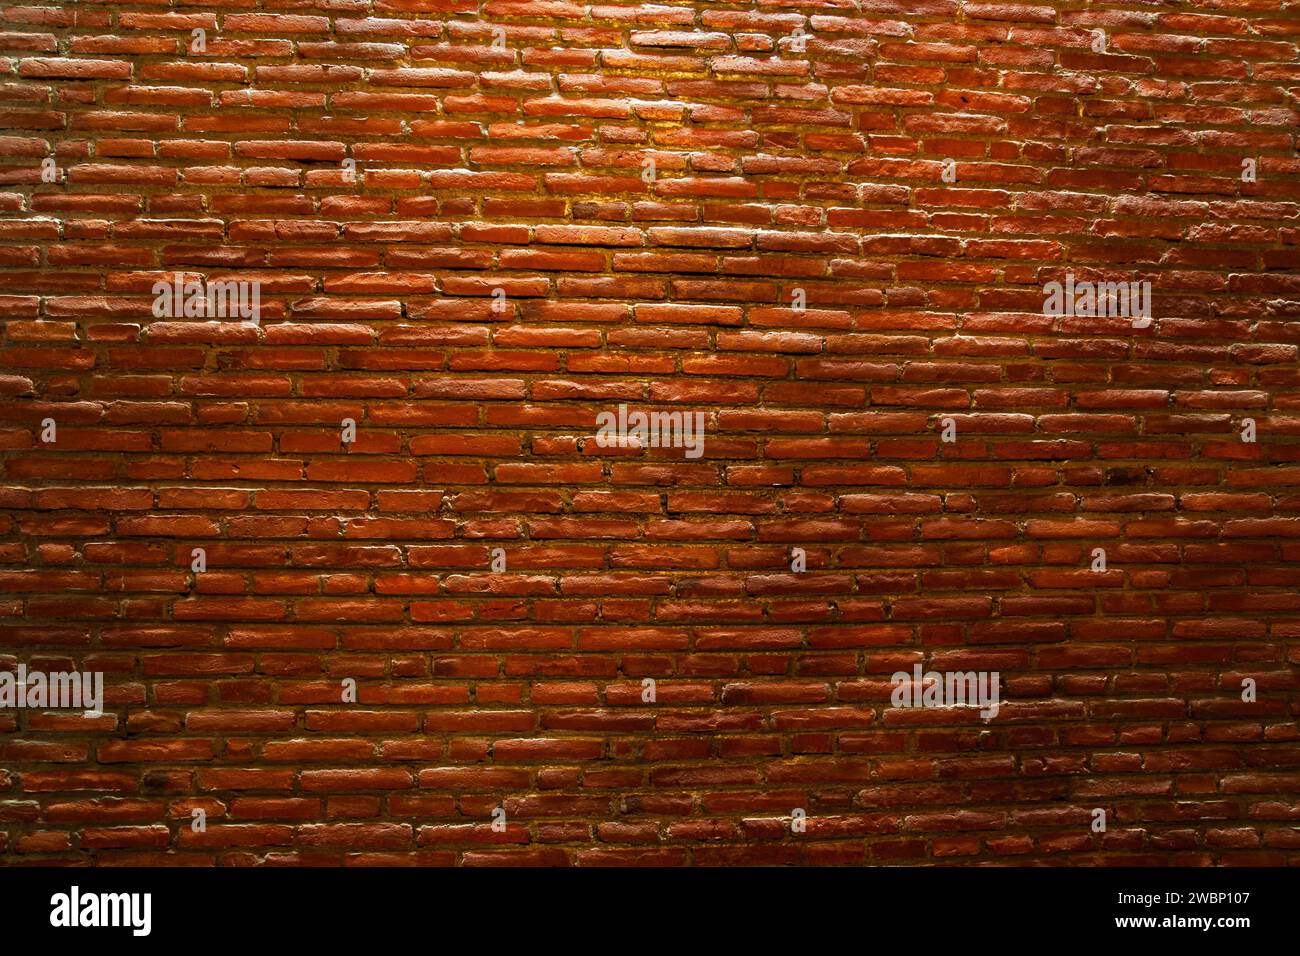 The red brick wall seen perspective from the front side for background Stock Photo